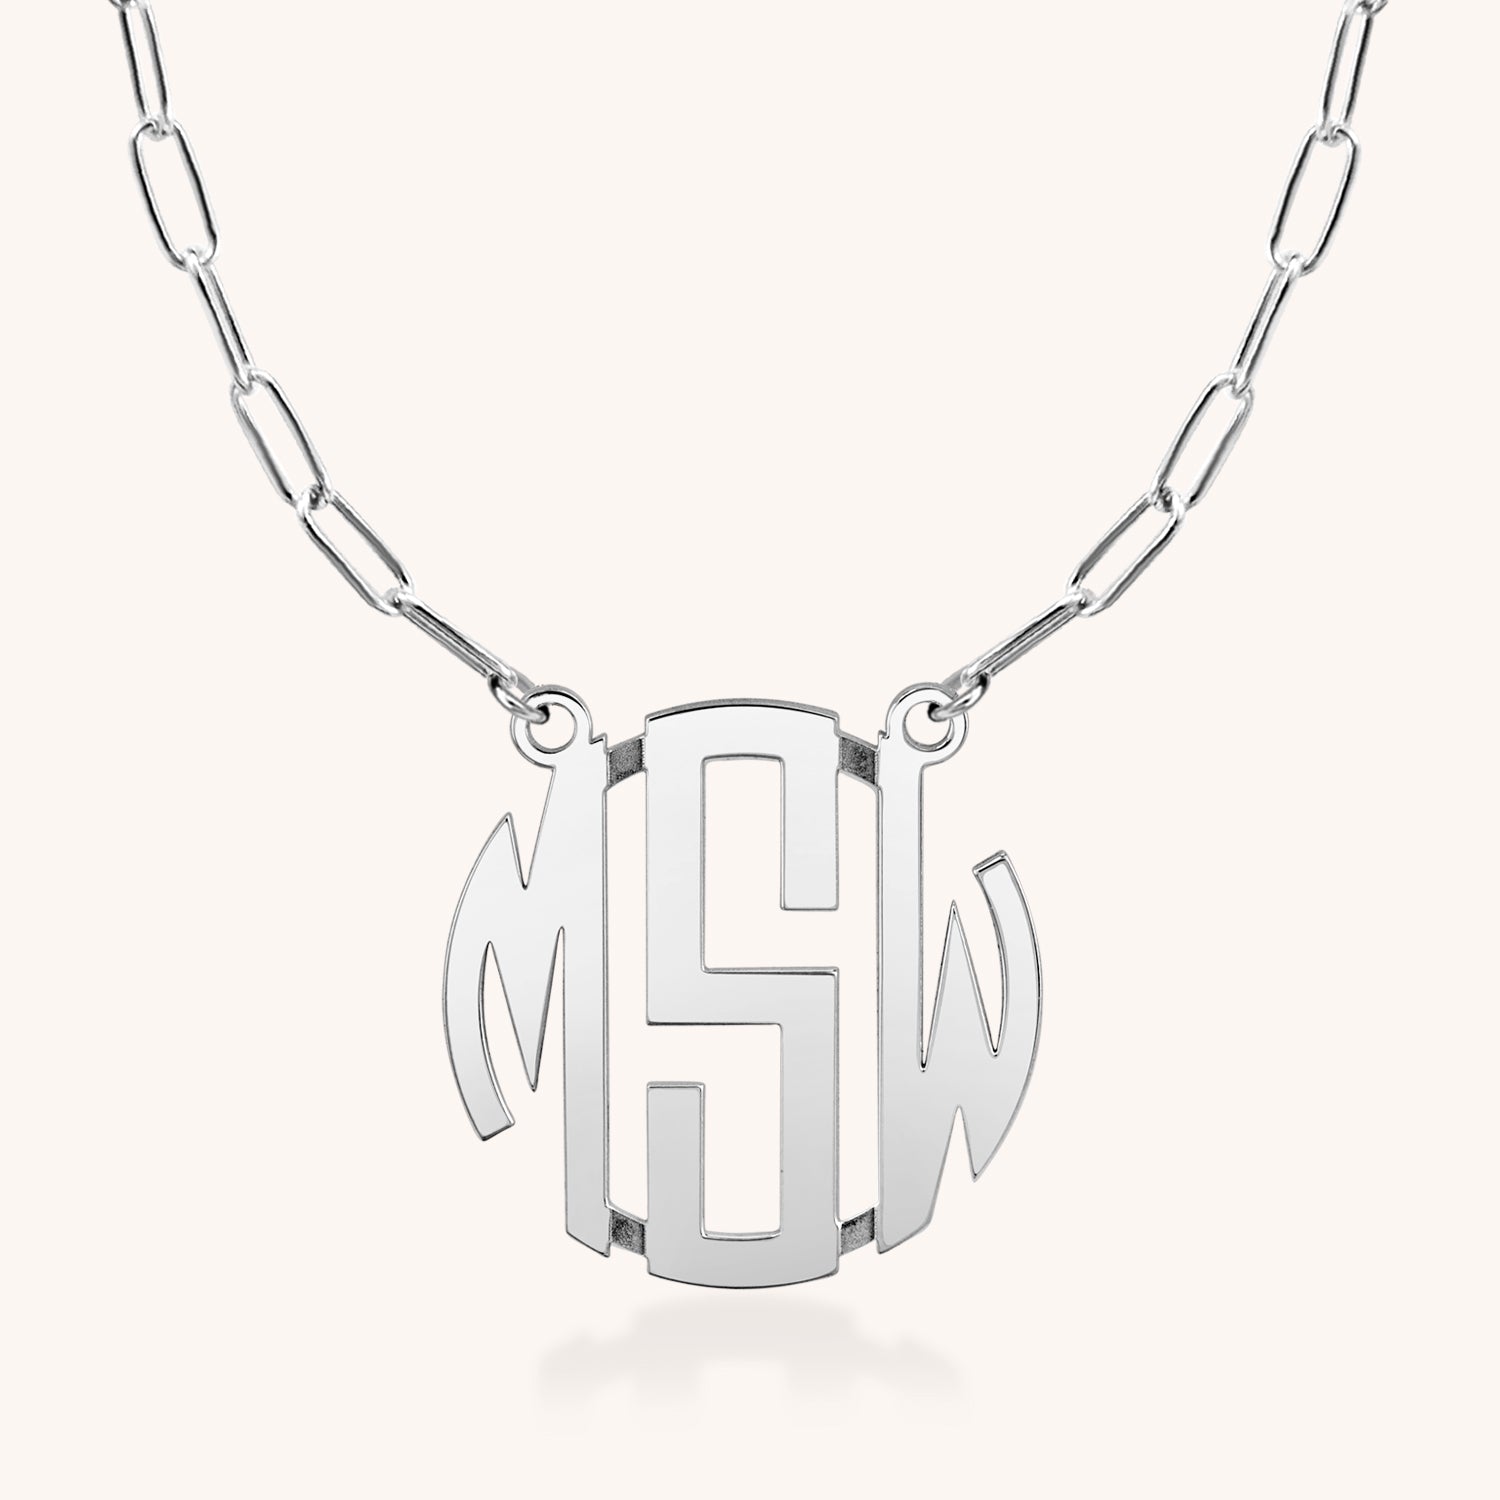 Small 10K Gold Block Letter Monogram Necklace